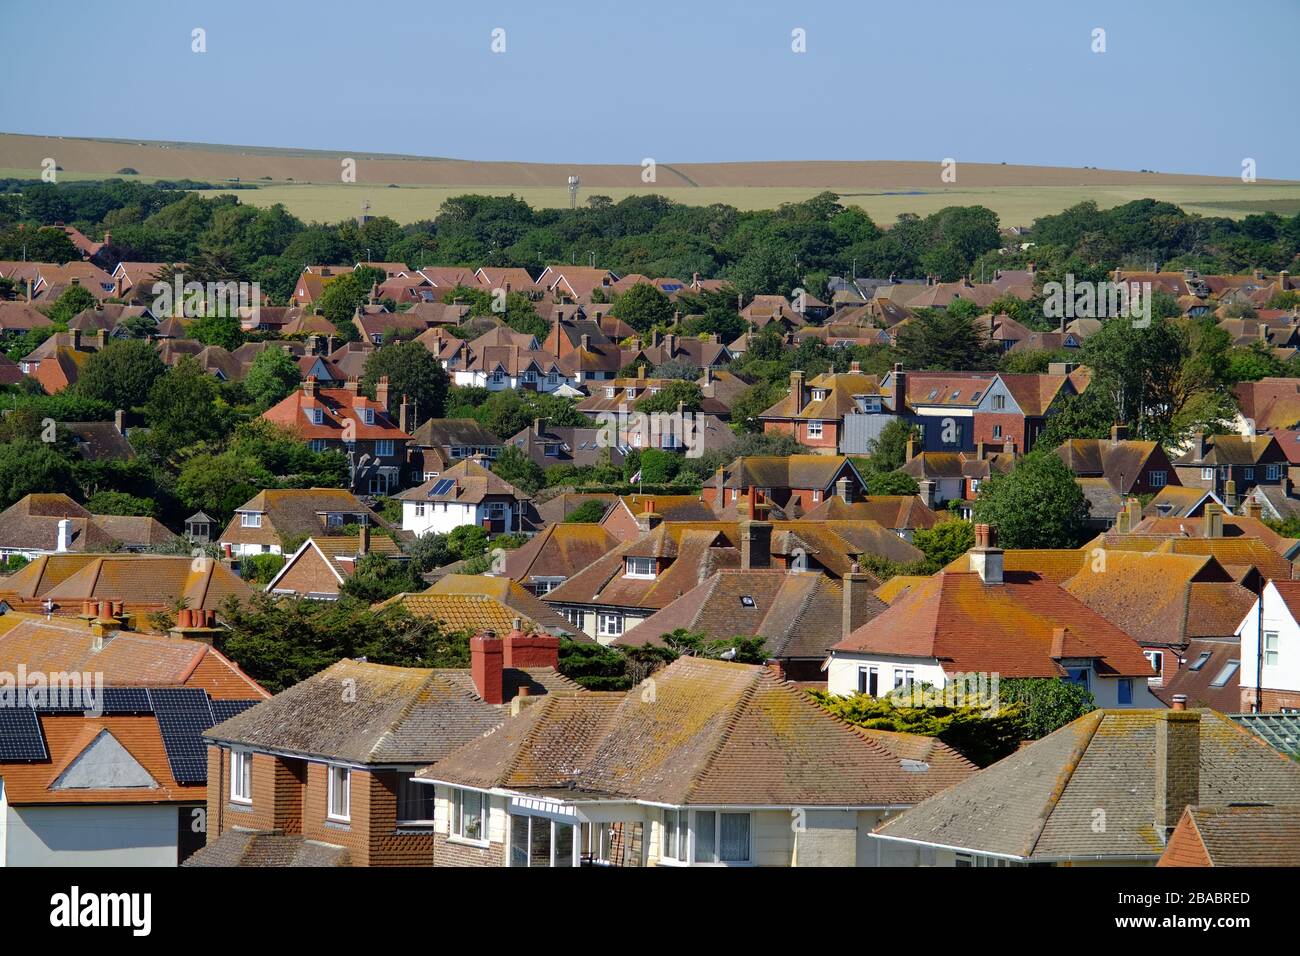 Housing stock in a small English town, Seaford, East Sussex, UK, nestled in the South Downs. Stock Photo